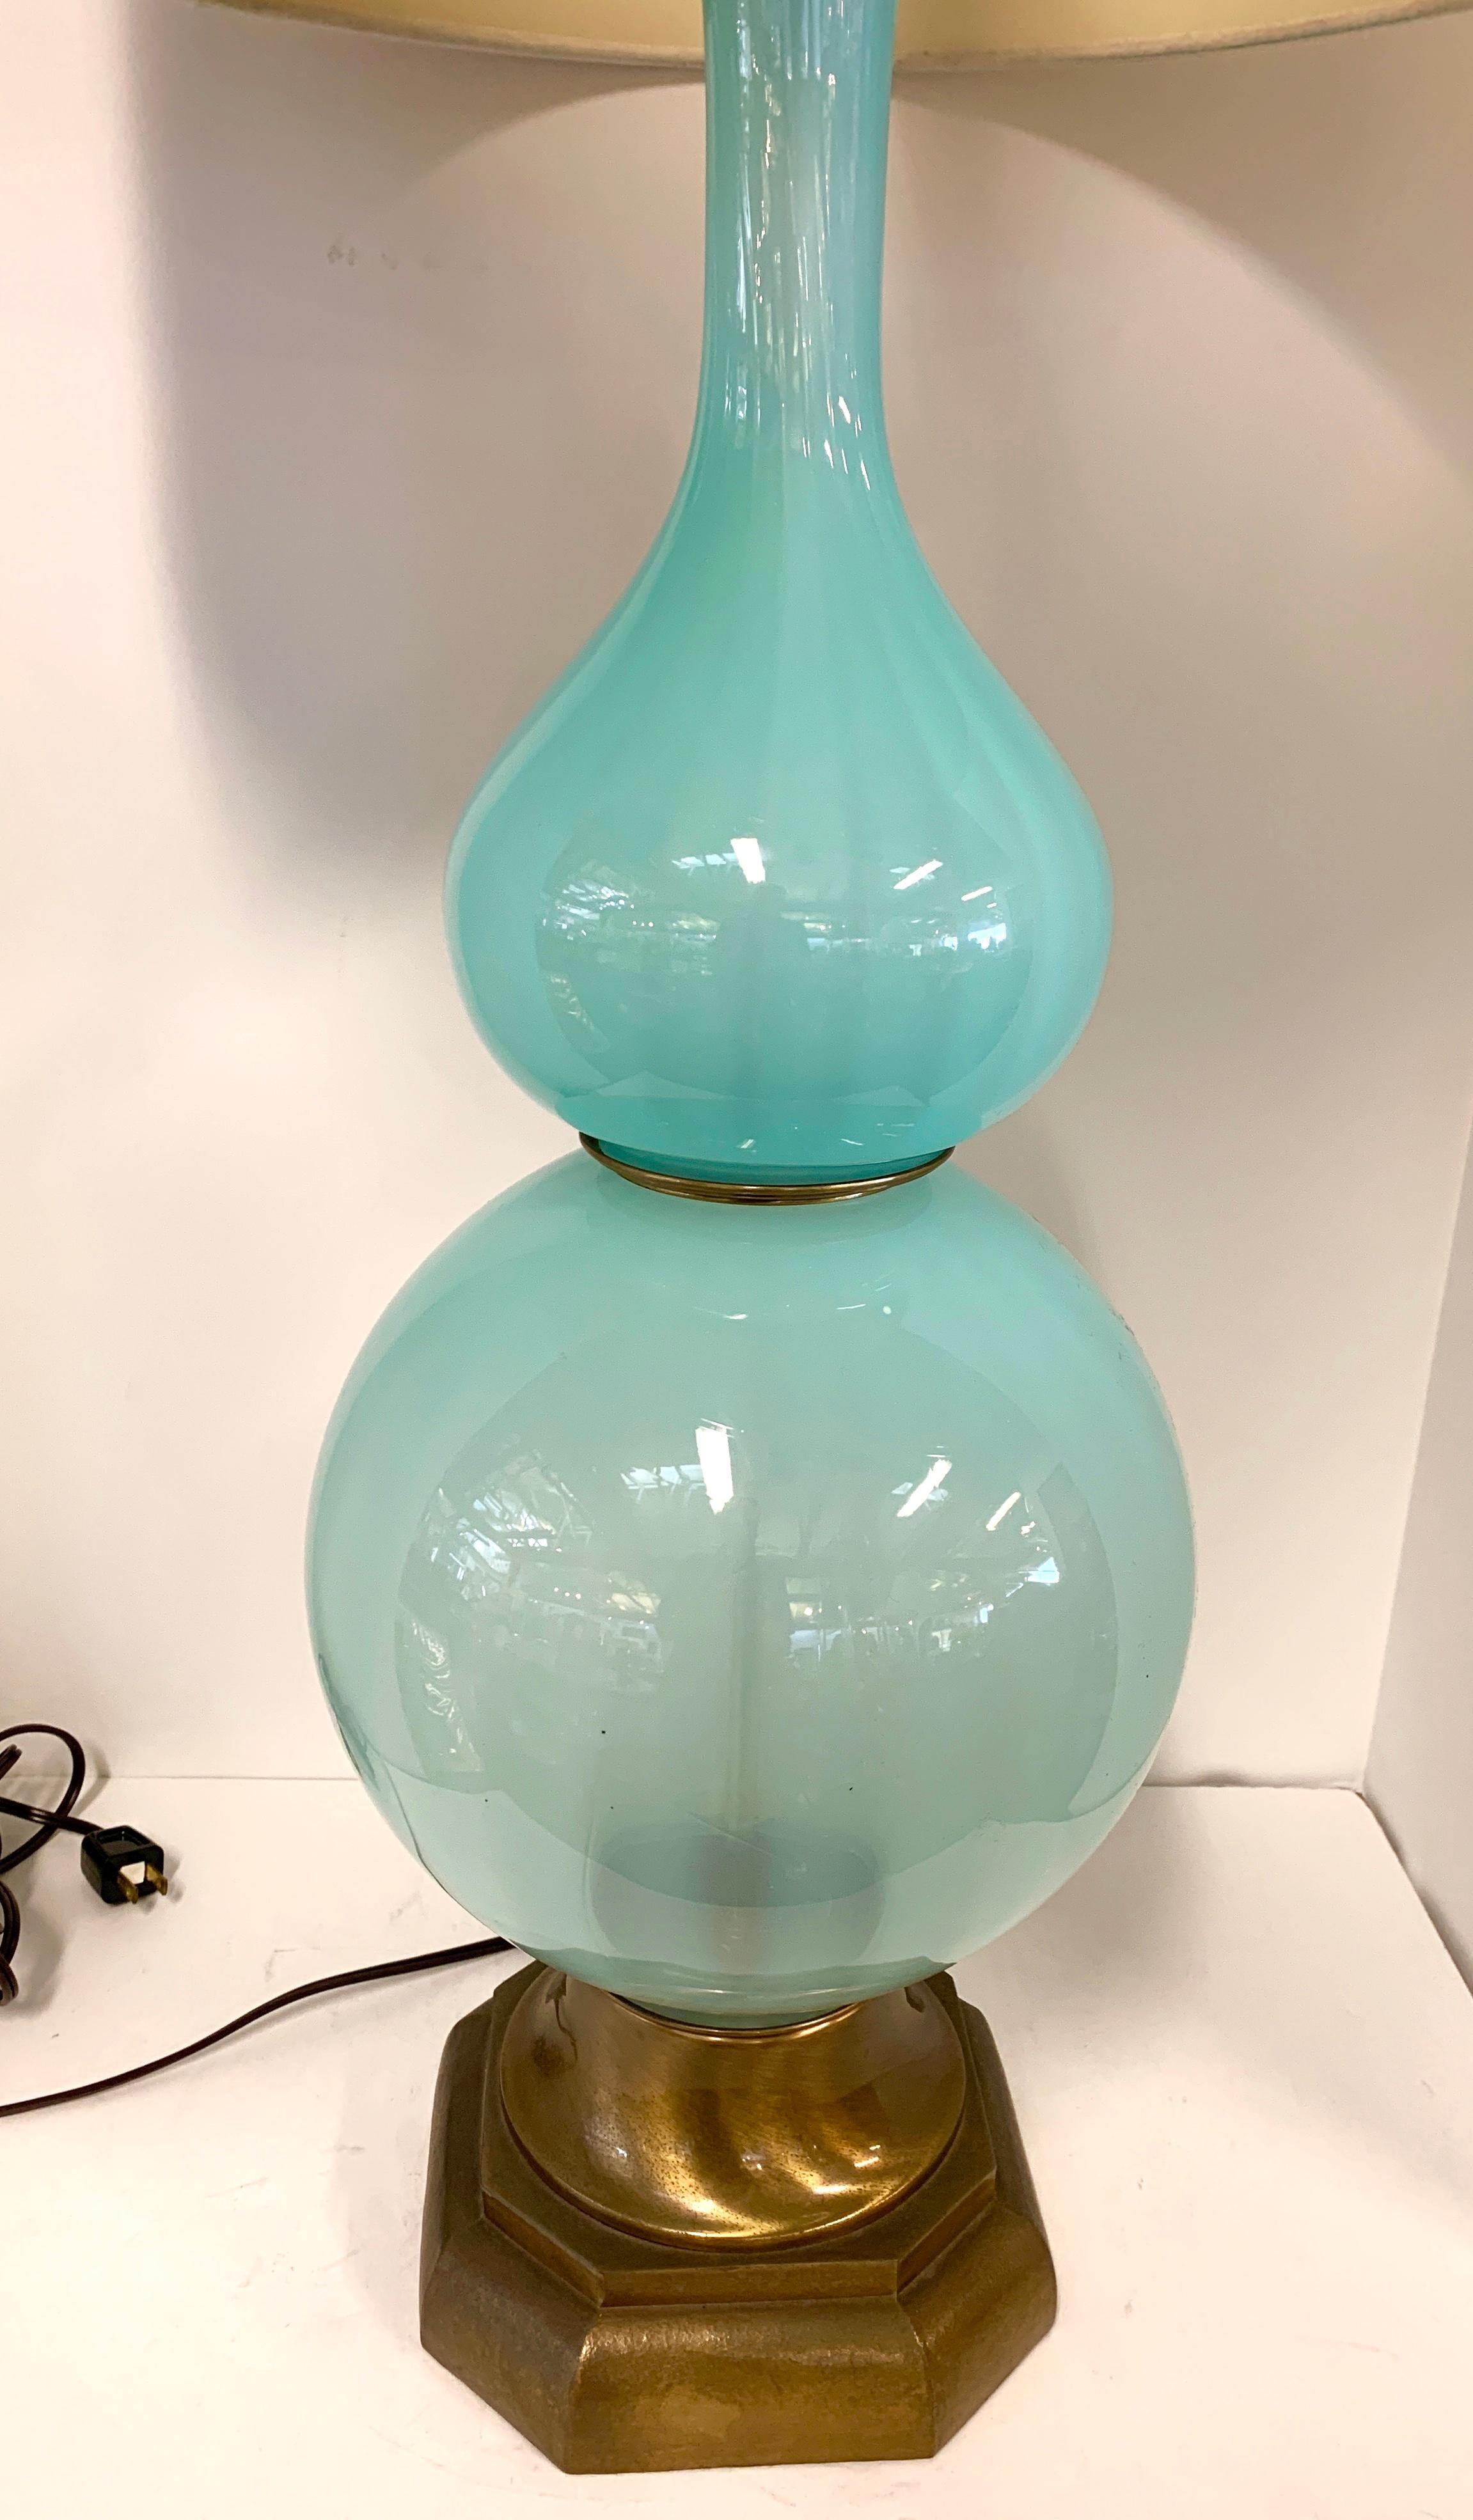 A vintage pretty and large Opaline Glass lamp with brass colored base. Lovely color. Rewired and with new fittings. Shade is included but has a few spots. The brass base has nice aged patina with some marks, pictured. Lamp is in good overall